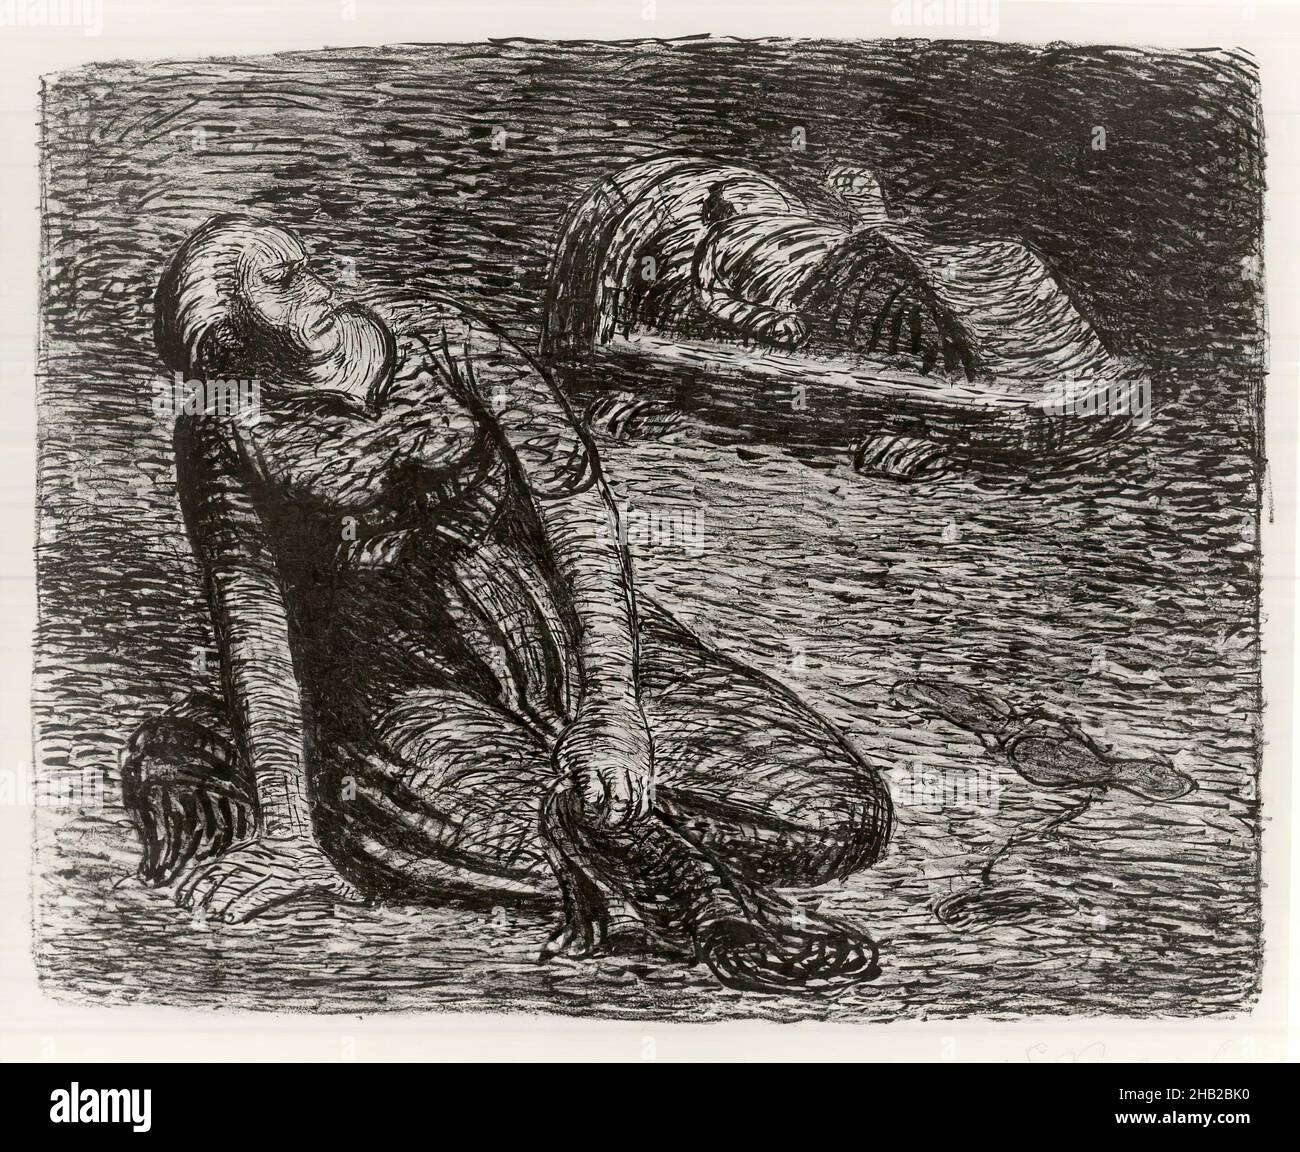 The Bloodstains 2, Der Blutflecken 2, The Dead Day, Der Tote Tag, Plate 16, Ernst Barlach, German, 1870-1938, Lithograph on wove buff paper, Germany, 1912, Image: 7 15/16 x 10 1/16 in., 20.2 x 25.6 cm Stock Photo